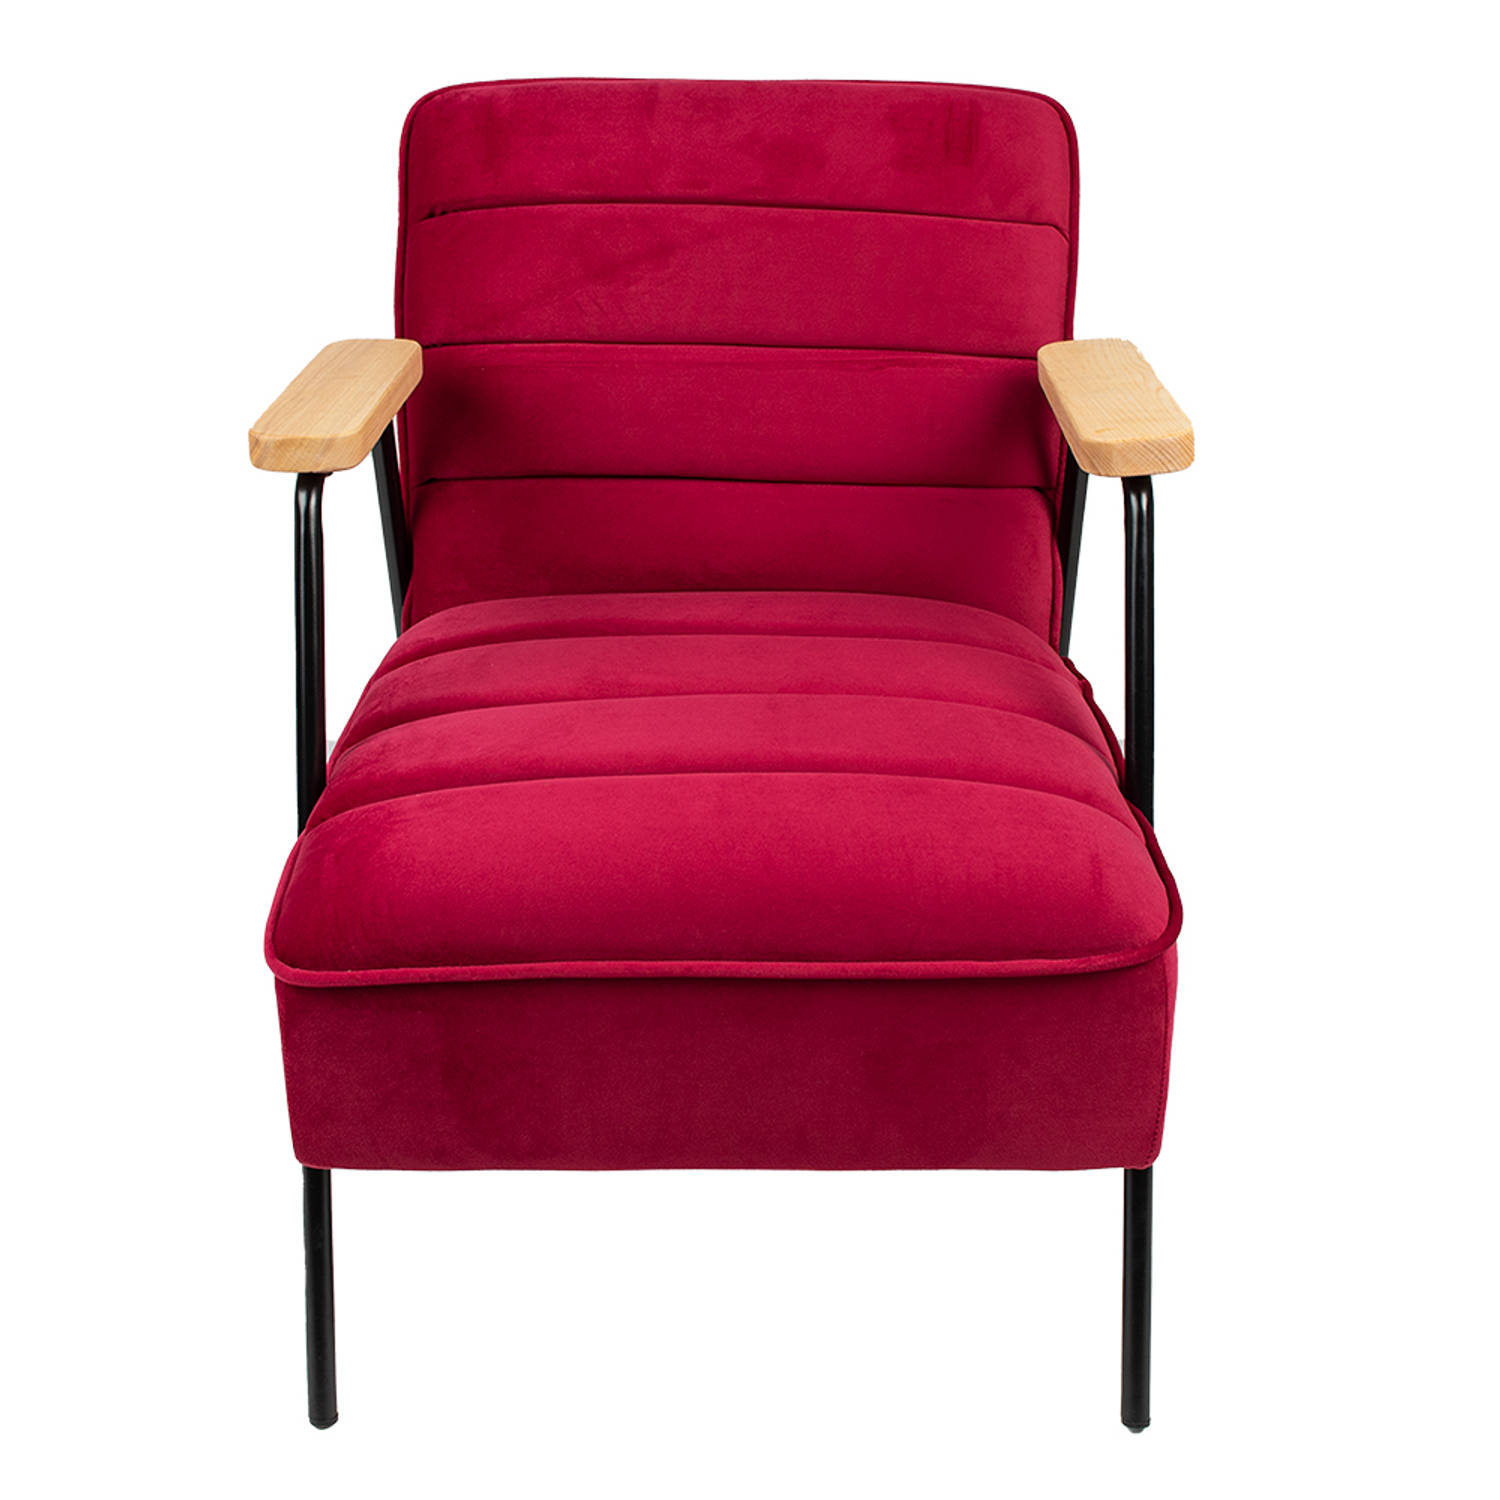 Clayre & Eef Fauteuil Met Armleuning 60*69*78 Cm Rood Textiel Relax Stoel Fauteil Stoel Rood Relax S